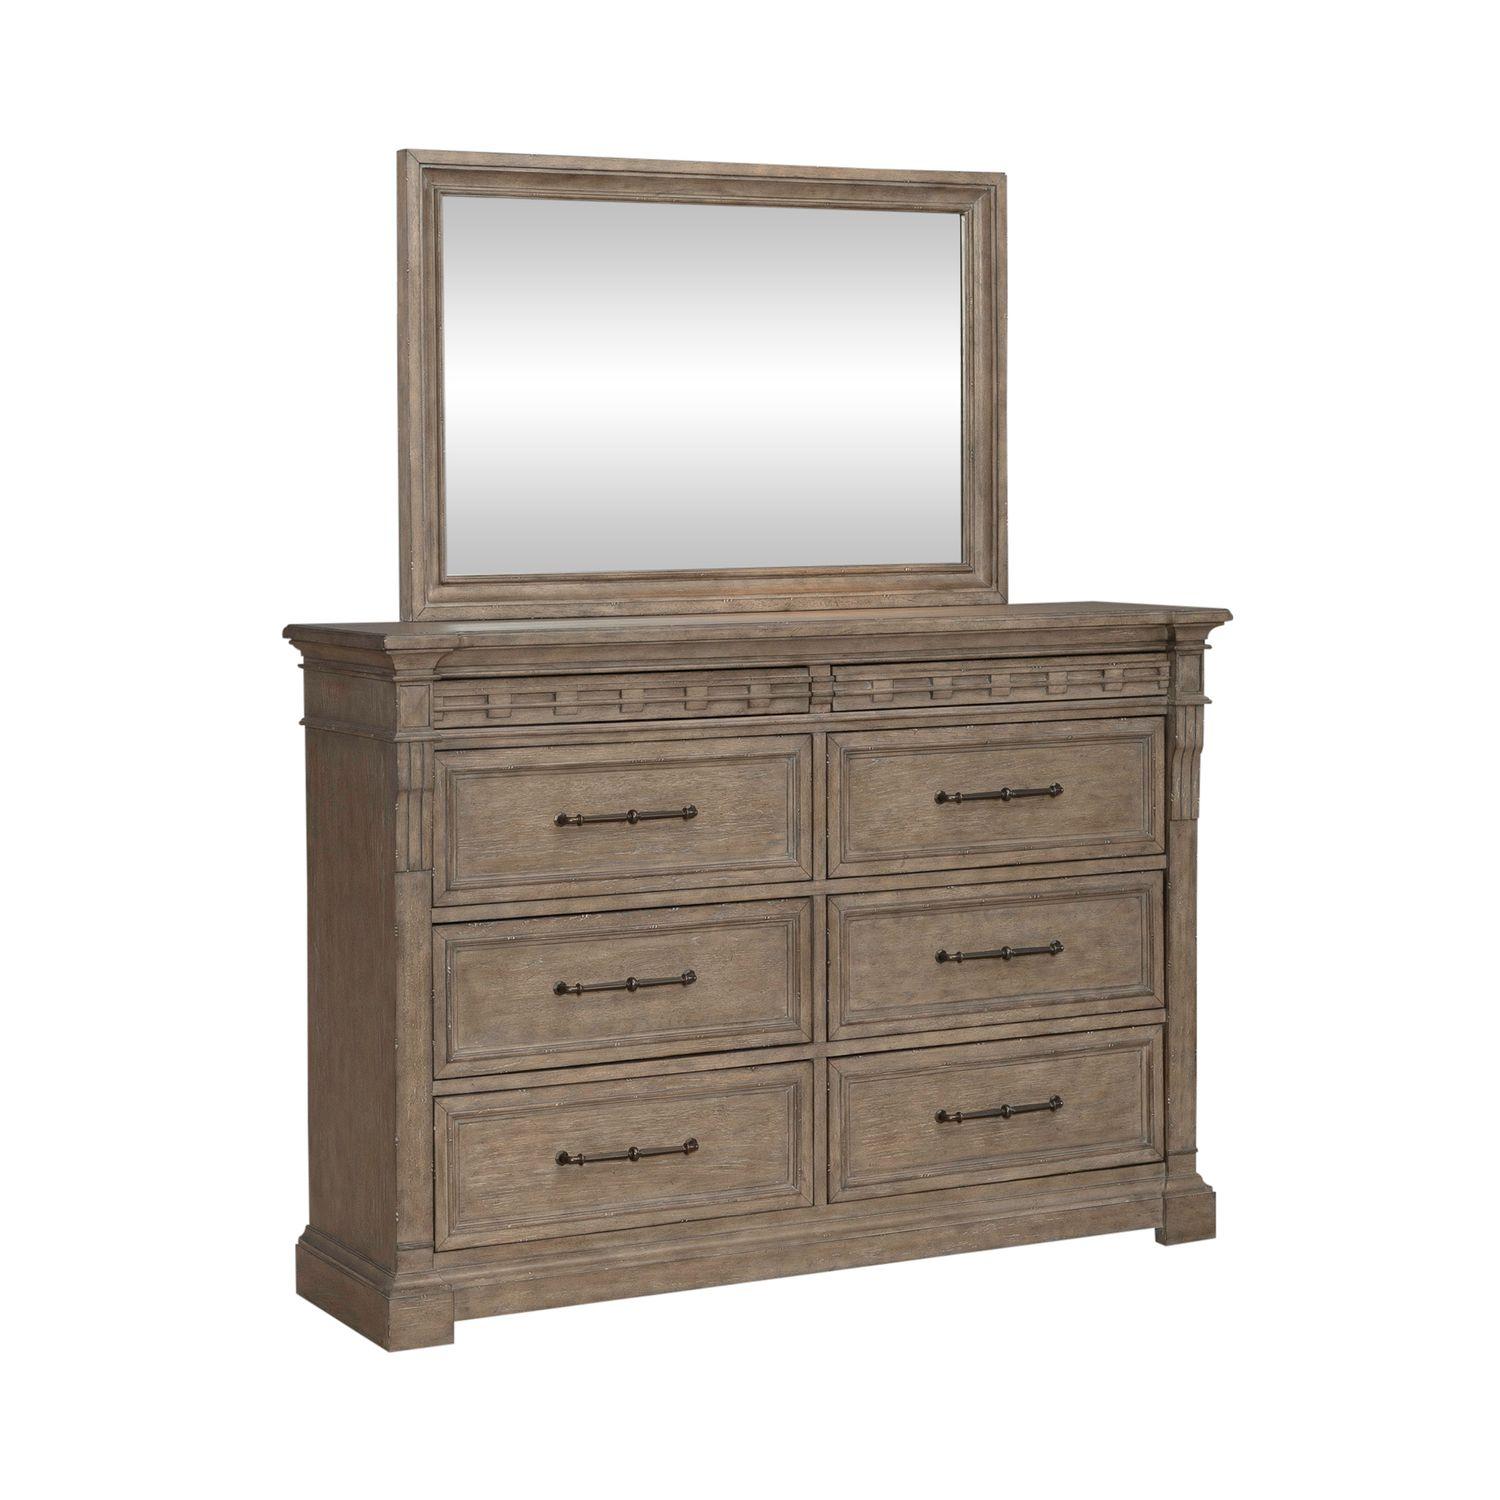 Transitional Dresser With Mirror Town & Country (711-BR) 711-BR-DM in Taupe 